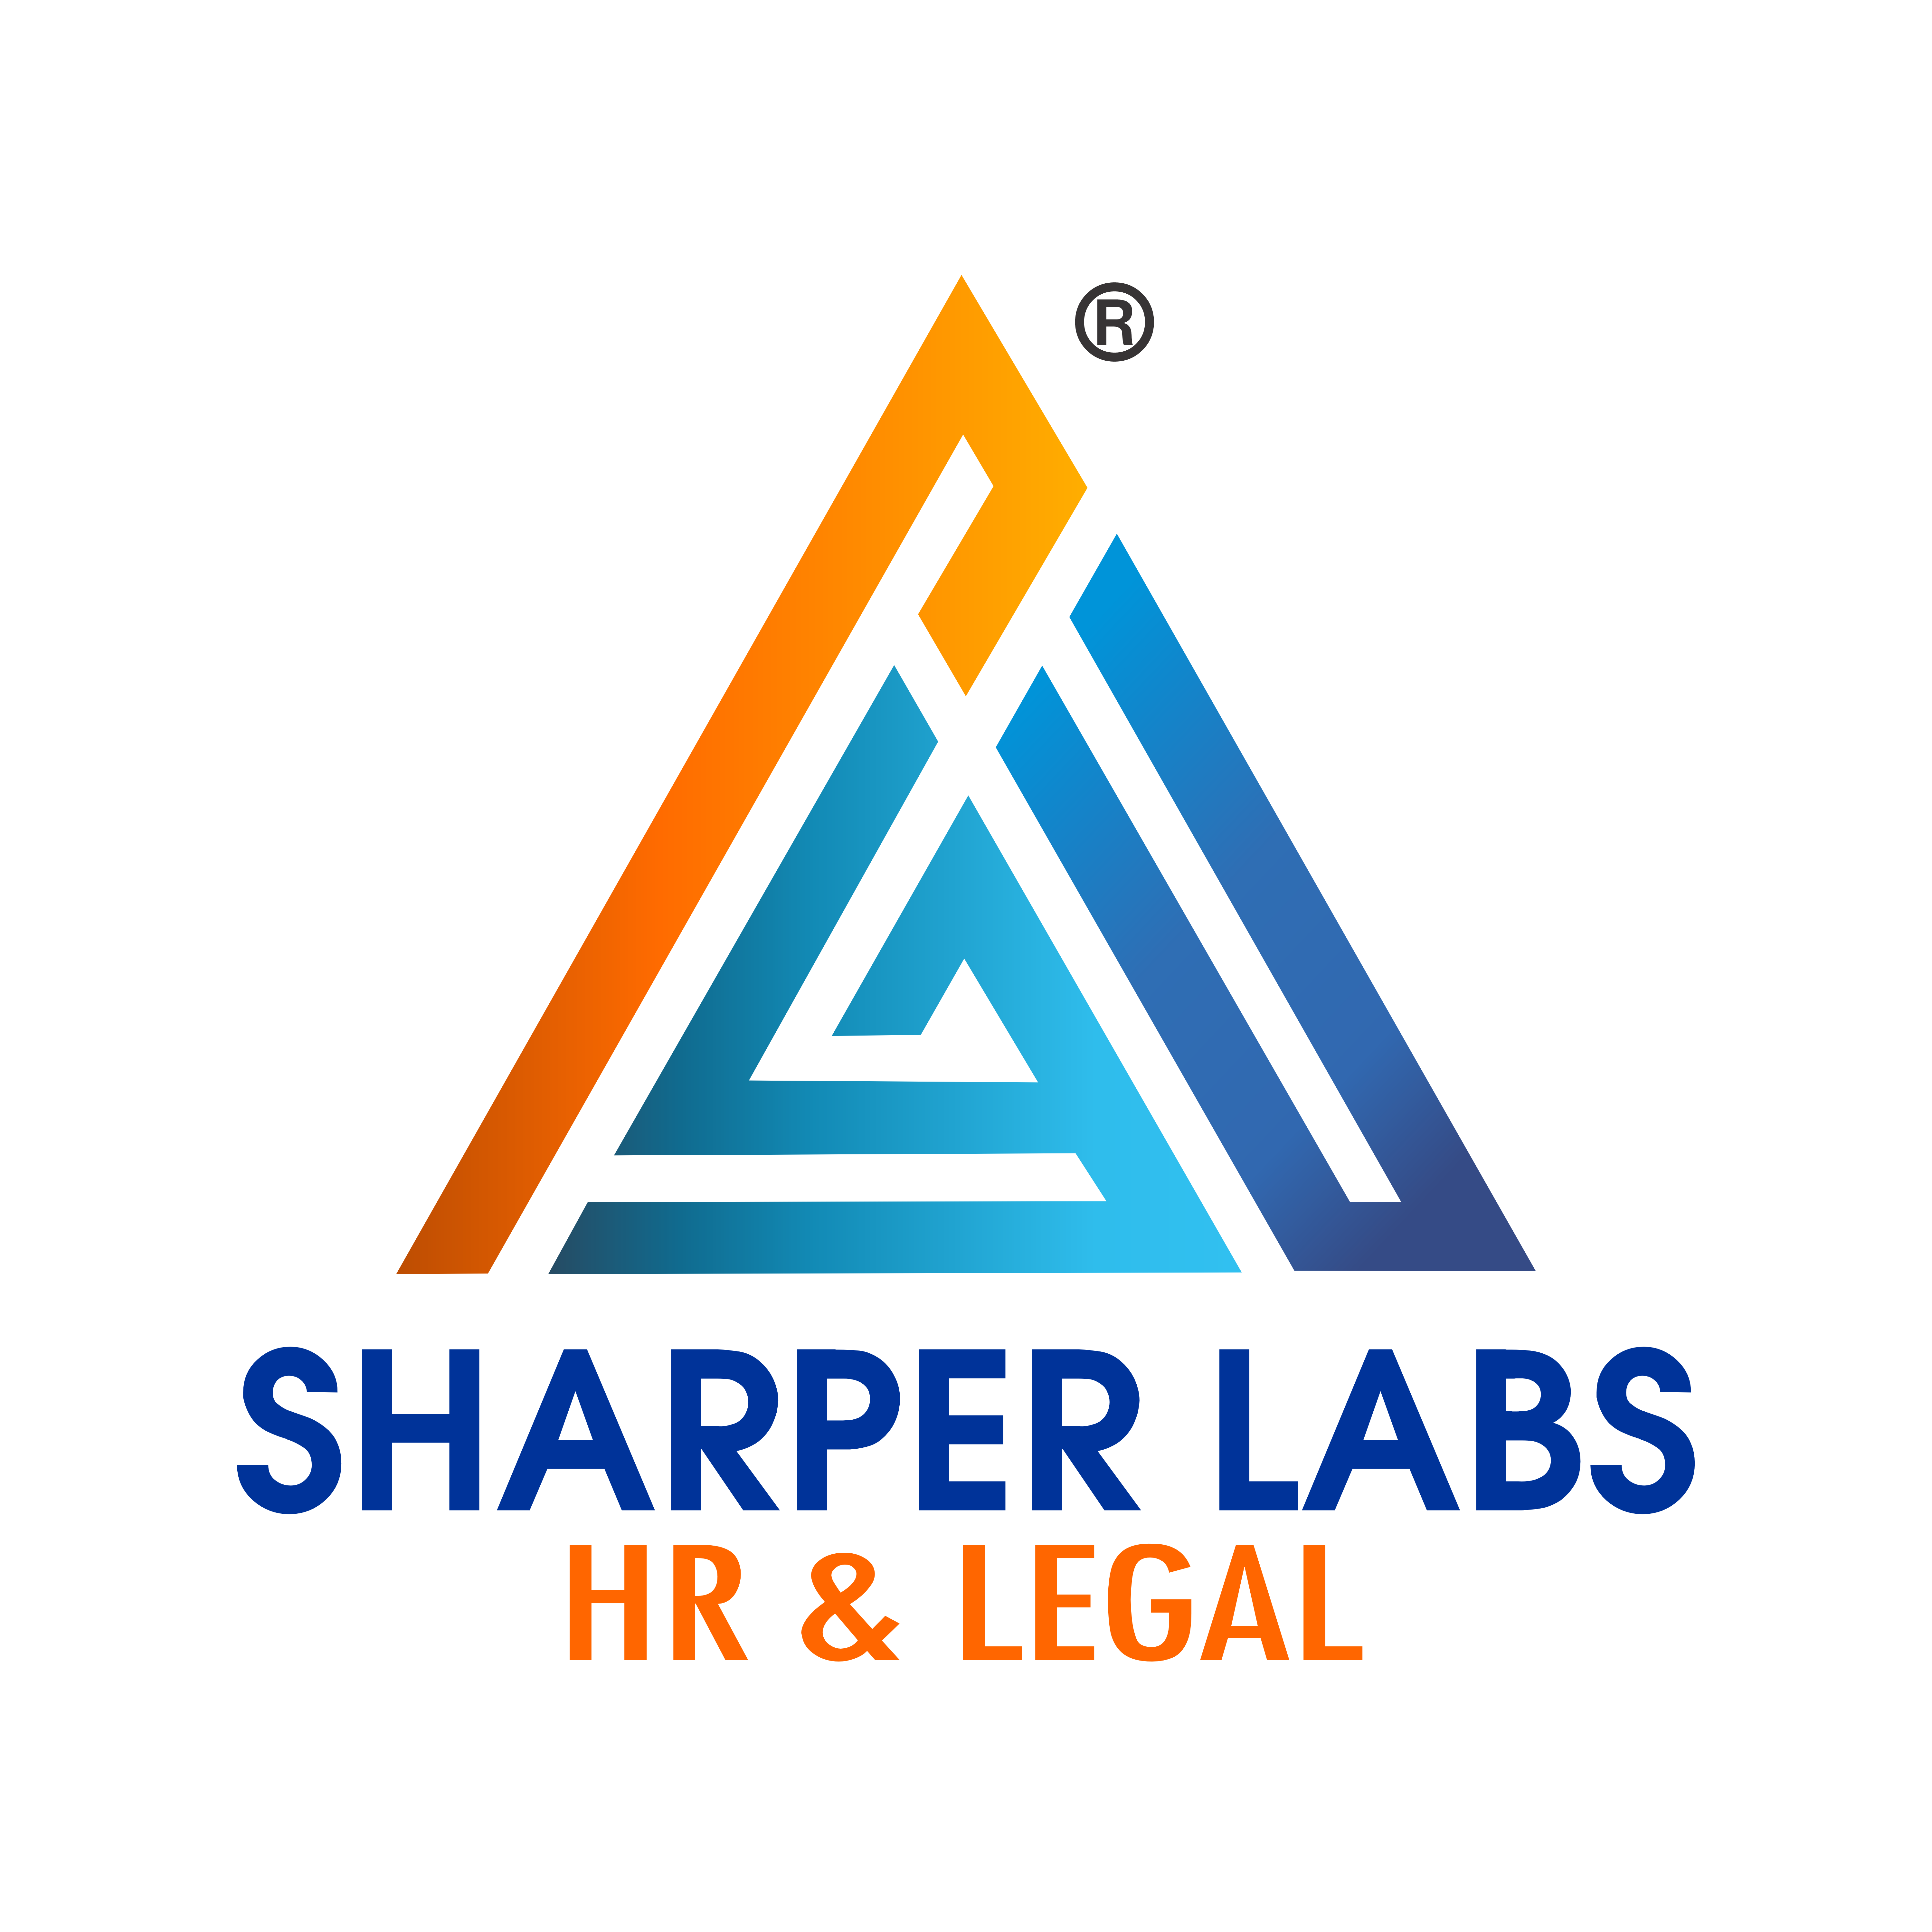 Logo of Sharper Labs HR & Legal Consultancy Human Resources Consultants In Colindale, London